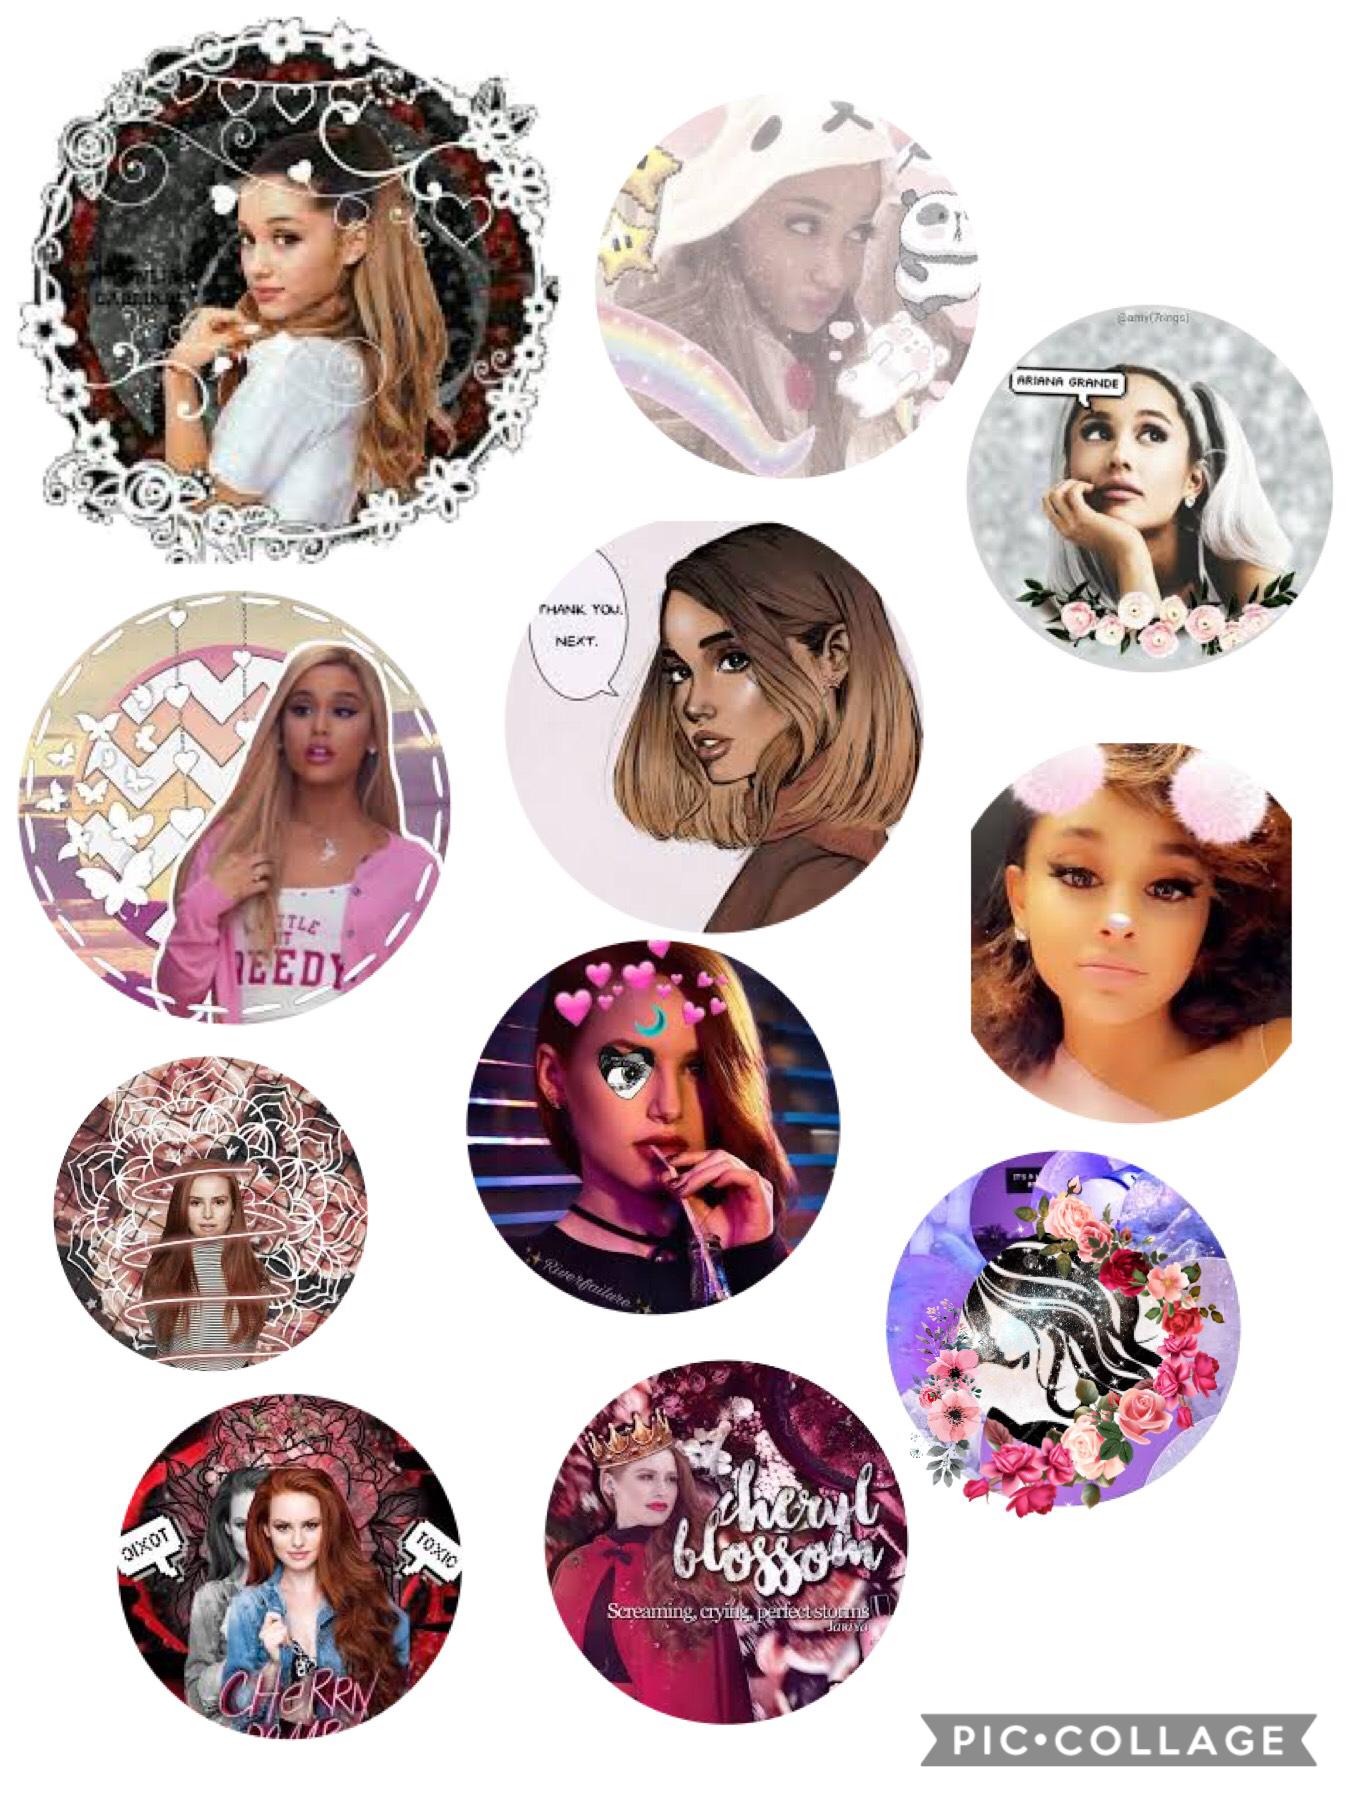 Cheryl blossom and Ariana Grande icons. Make sure to tell shyannjoiner thank you, if you do keep a icon, she got the question right. 